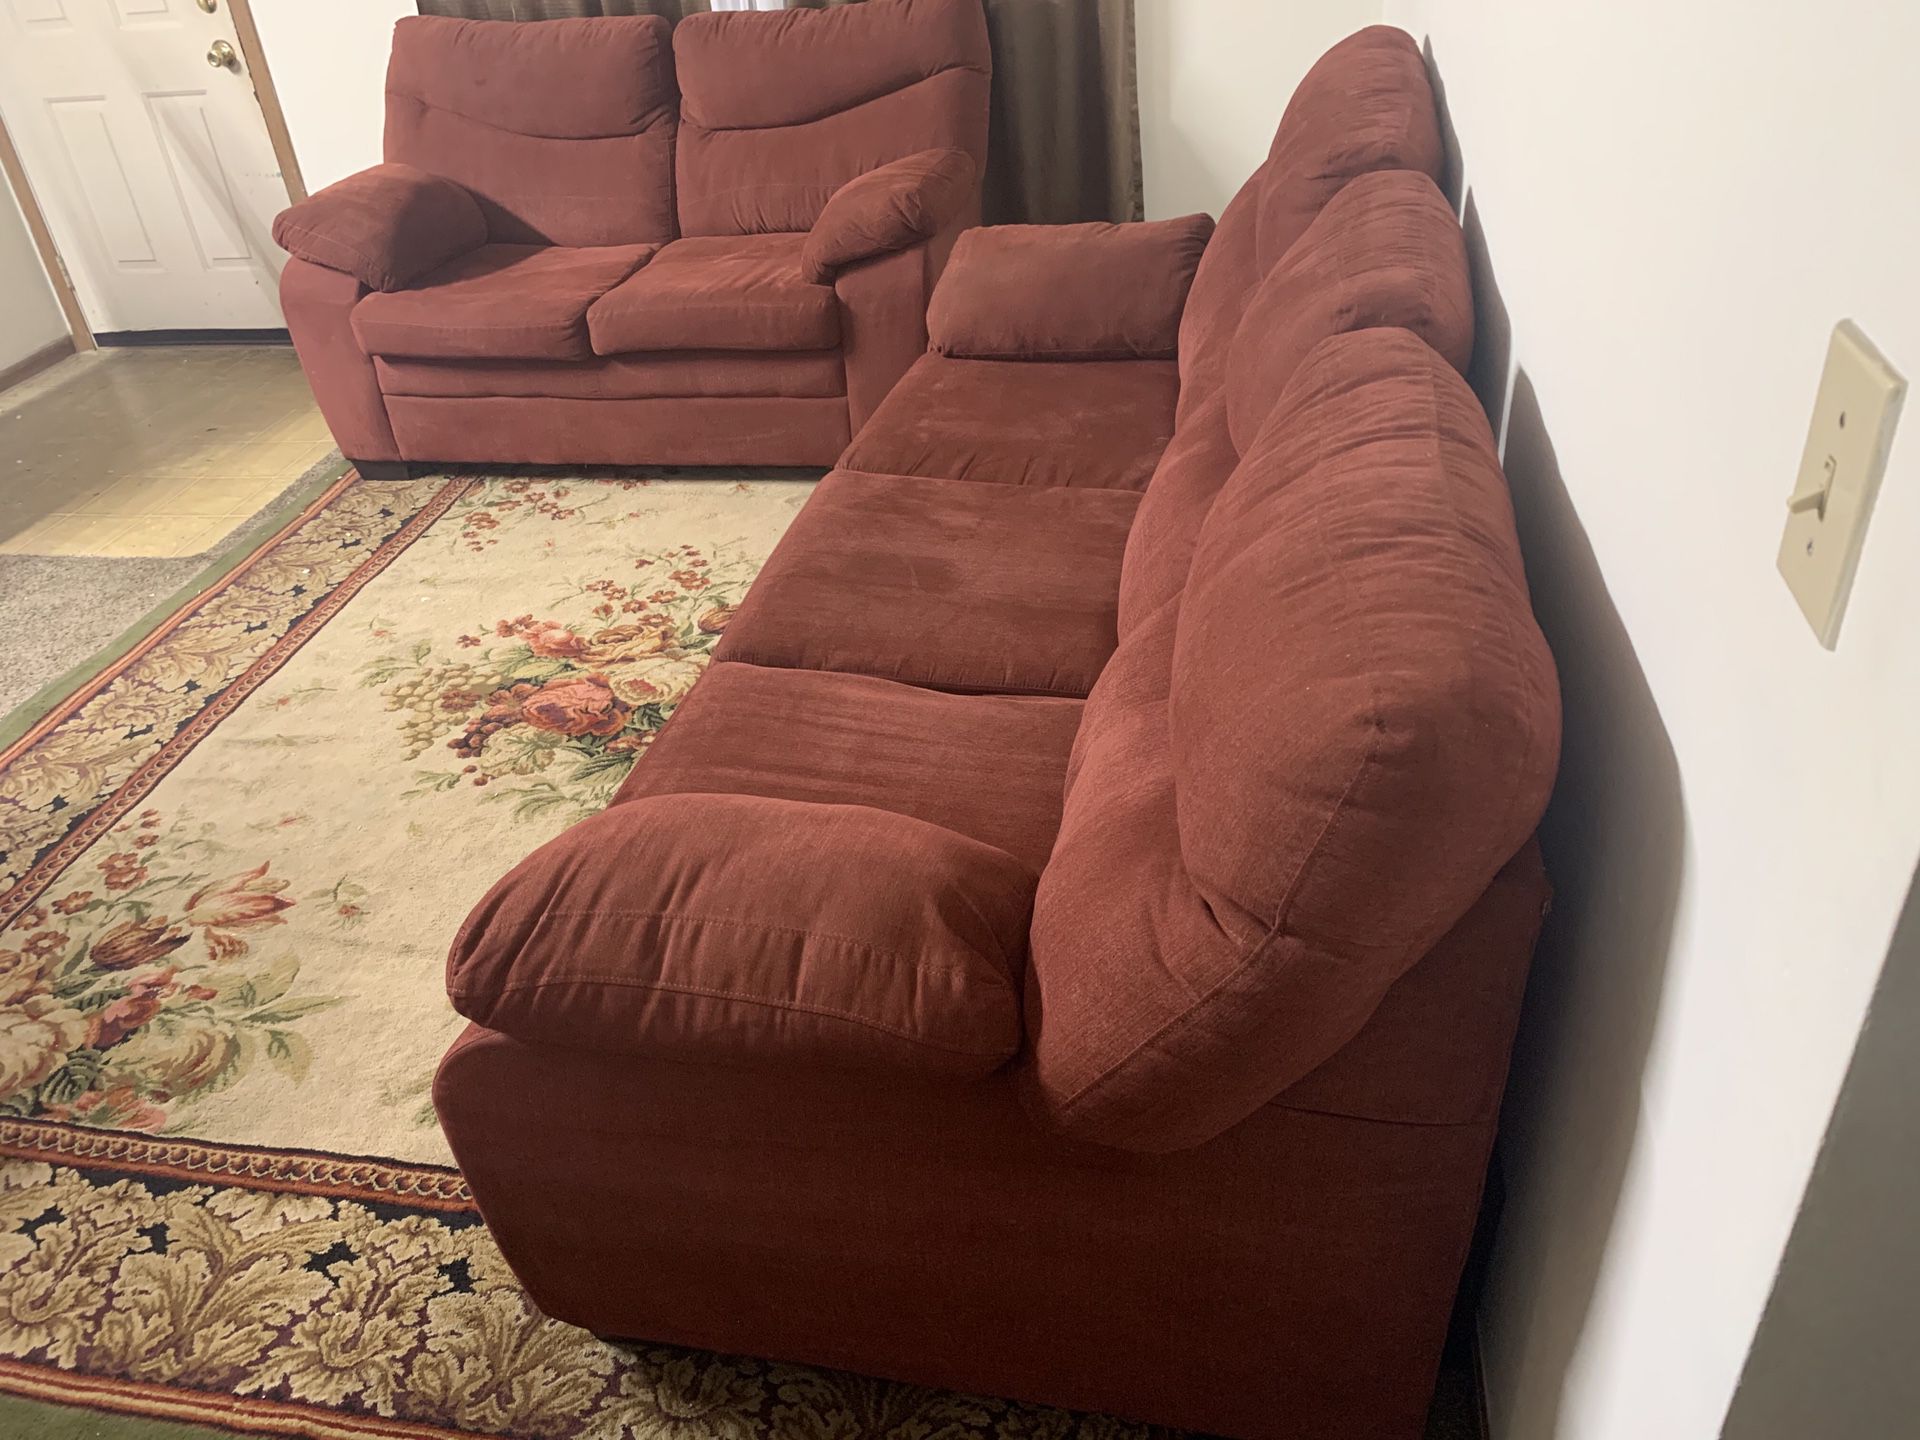 Couch it’s nice and clean it’s both red suede nothing wrong no rips or stains no pets or smoke it’s very comfortable